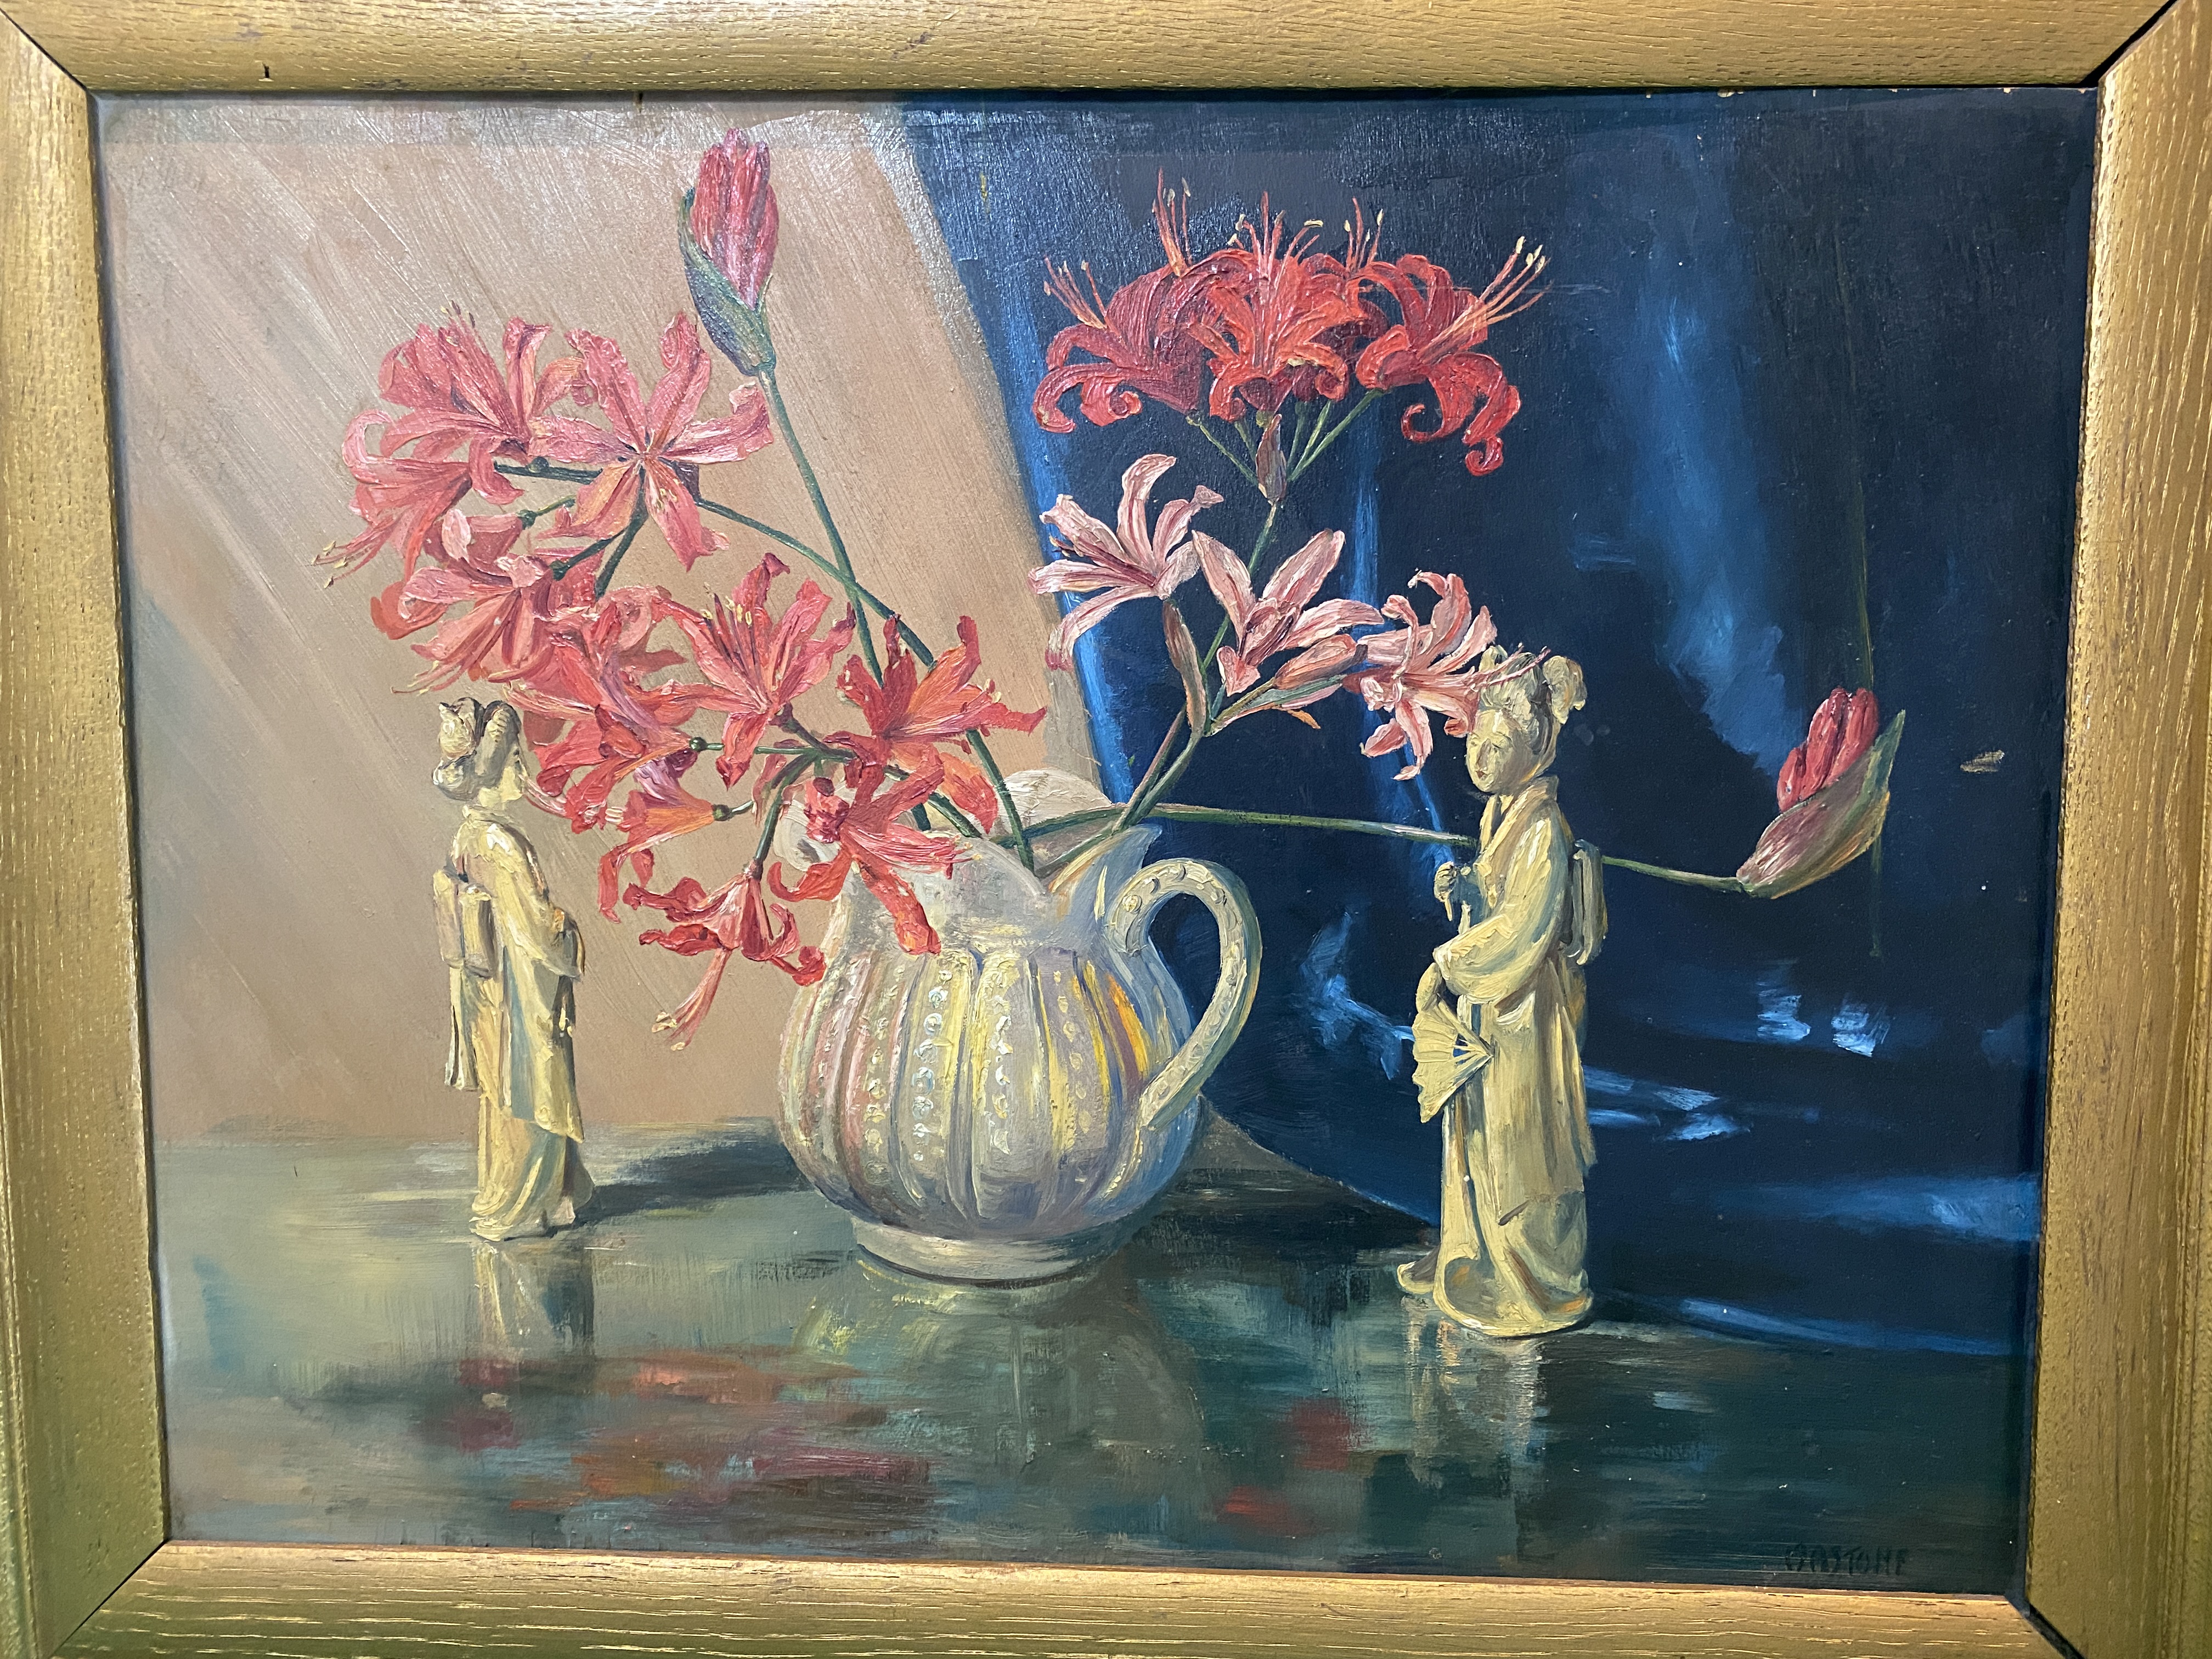 Detailed still life of flowers and ivory carvings of women., signed Masone lower right. - Image 2 of 6